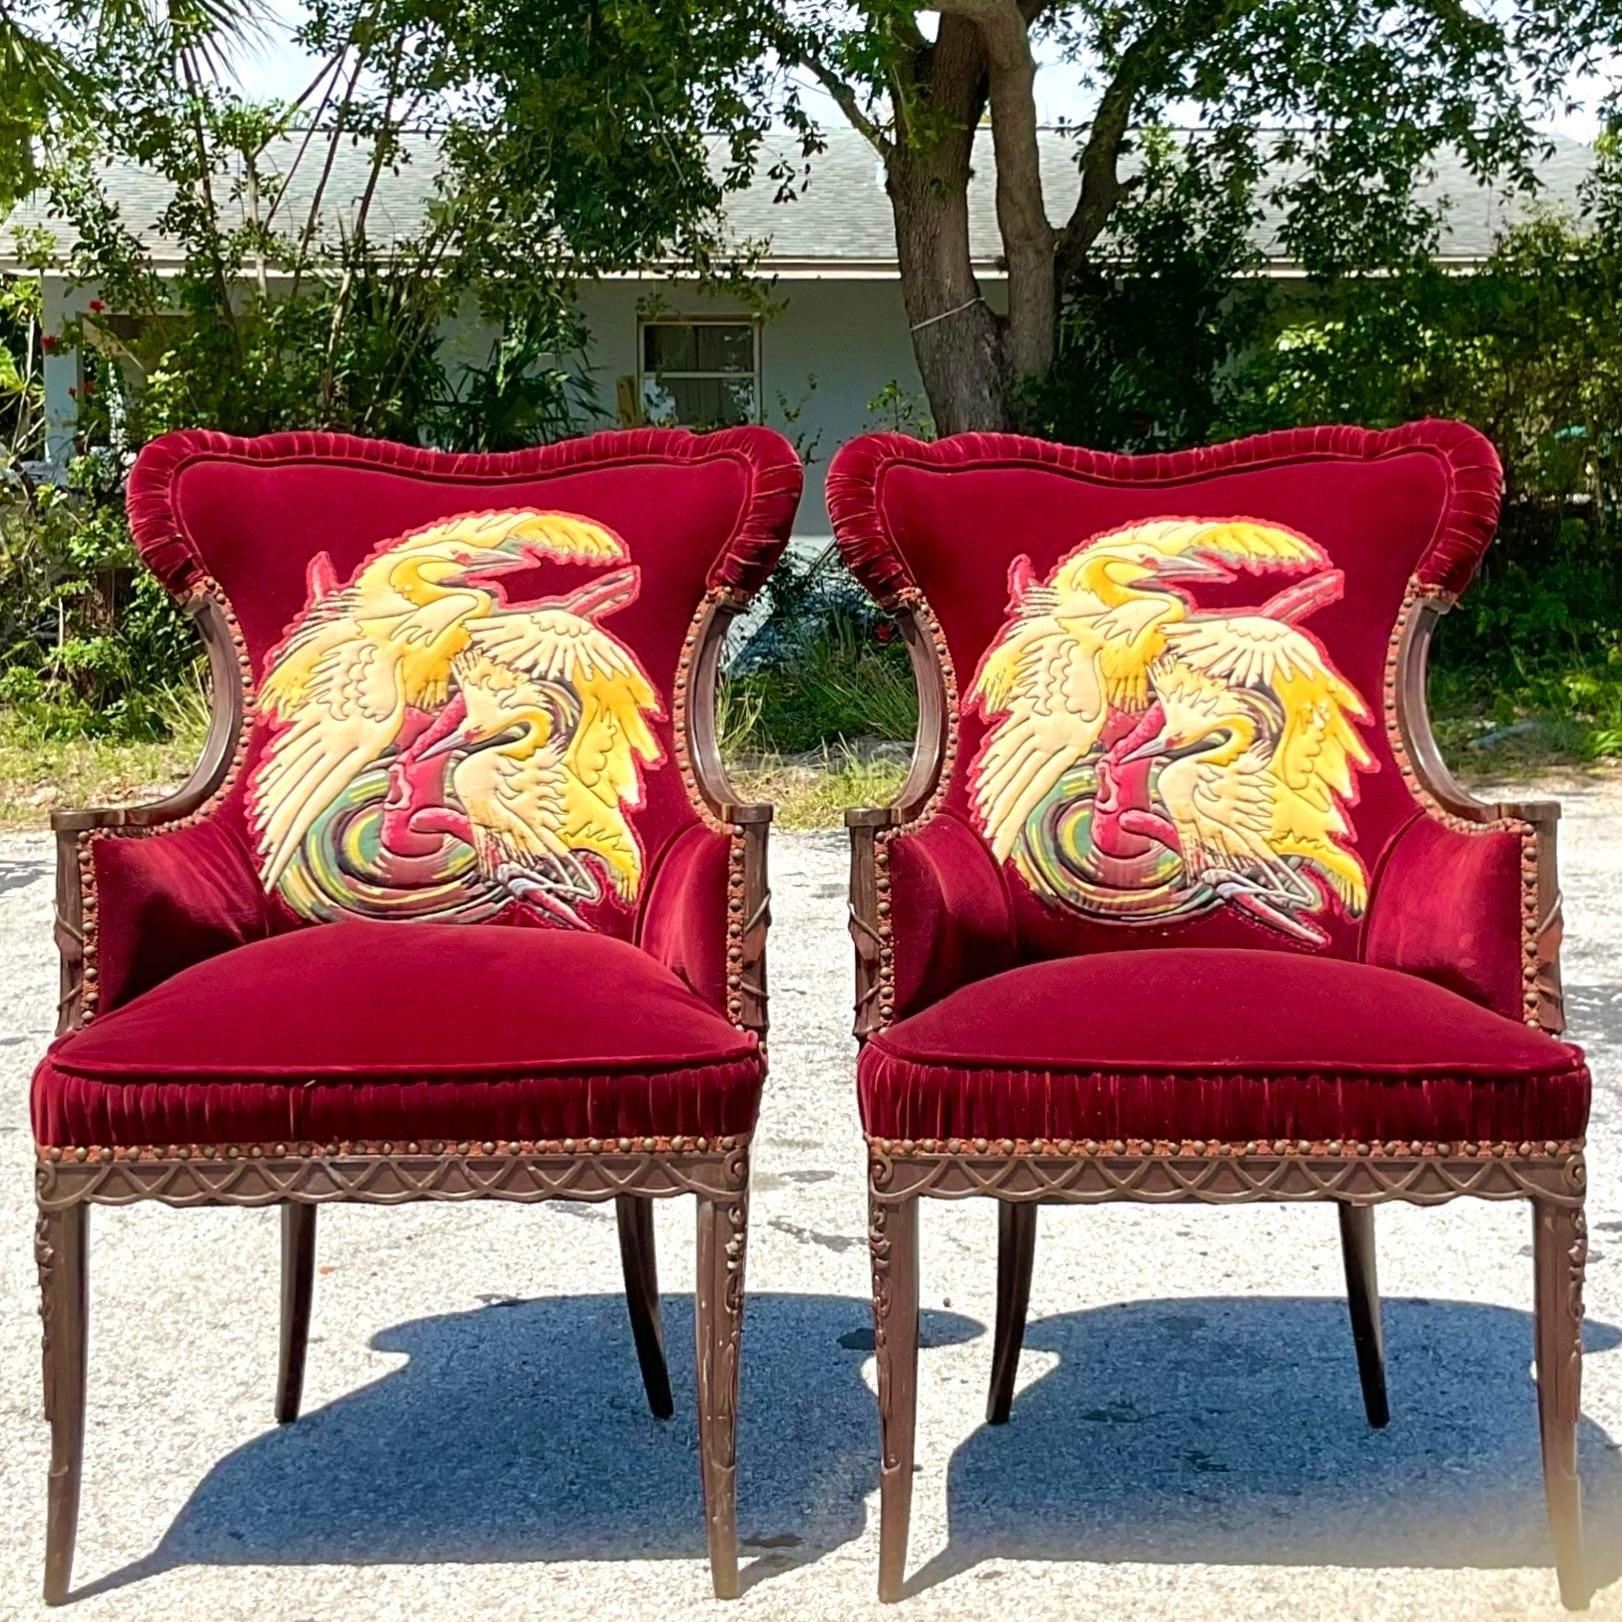 Vintage Boho Ruched Velvet Crane Arm Chairs - a Pair For Sale 4